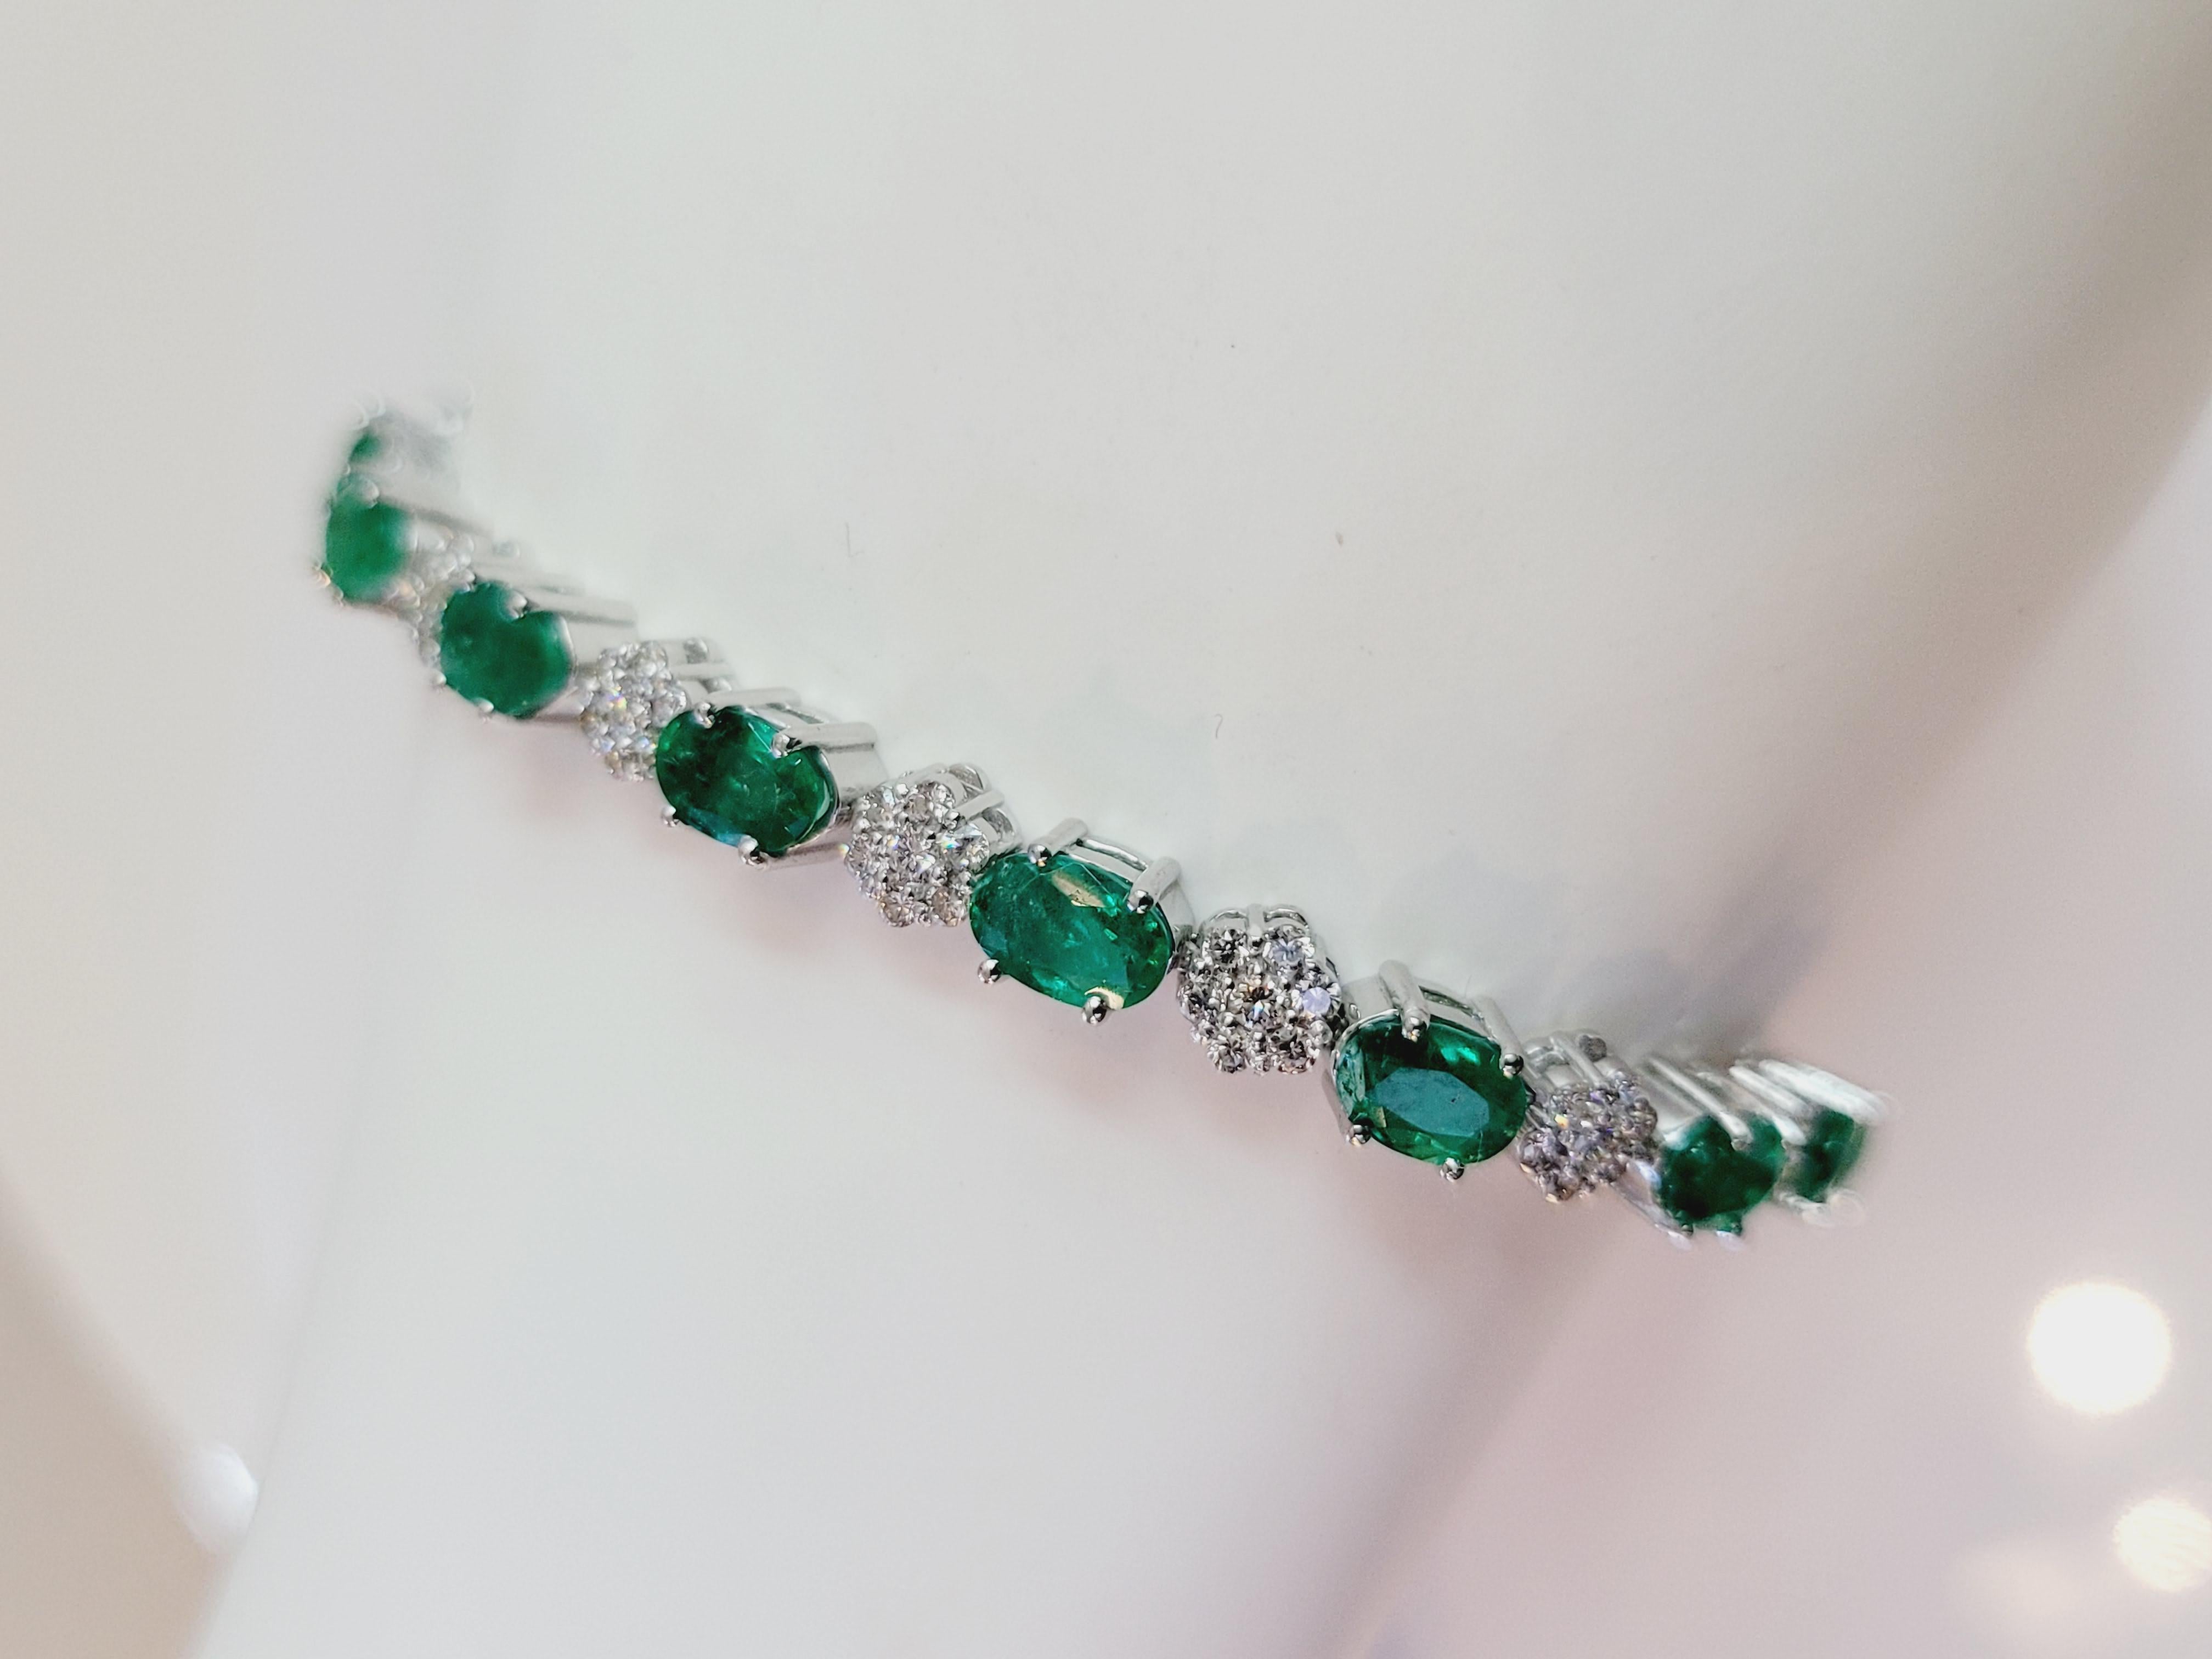 Hand Made Colombian Emerald
14K White Gold
Gender Women
Condition New
Emerald 18.20ct
Diamond 3.00ct 
Dia Clarity VS
Color Grade F
Bracelet length 7''
Retail Price $12.500